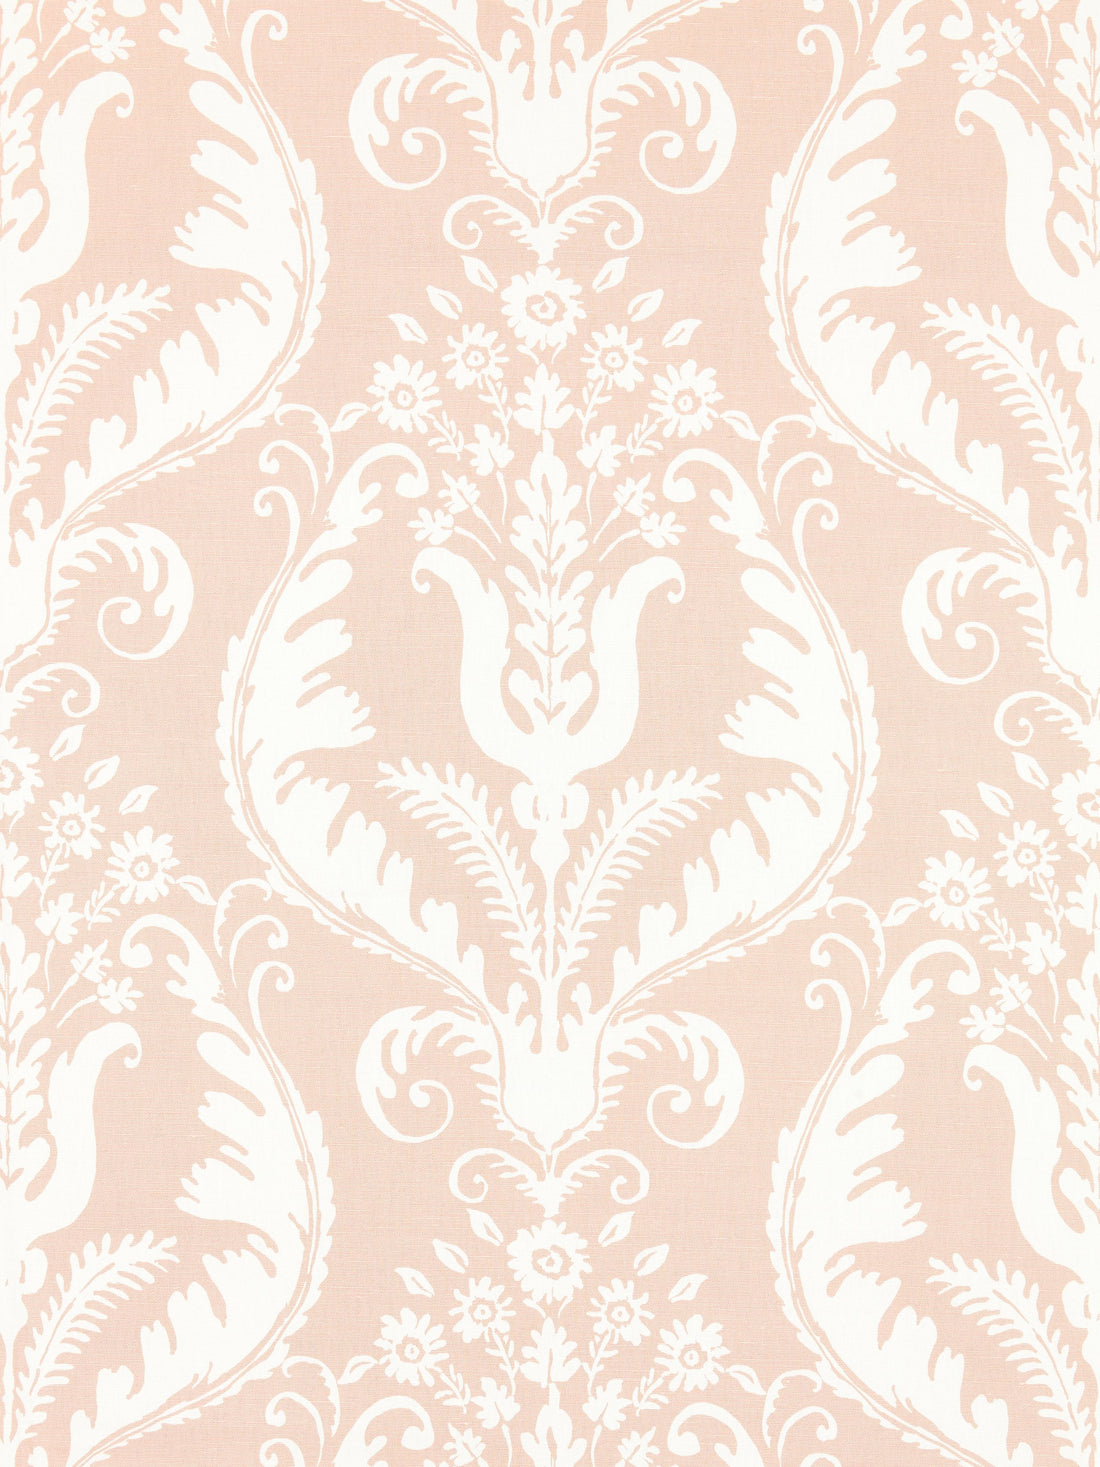 Primavera Linen Print fabric in blush color - pattern number SC 000116597 - by Scalamandre in the Scalamandre Fabrics Book 1 collection